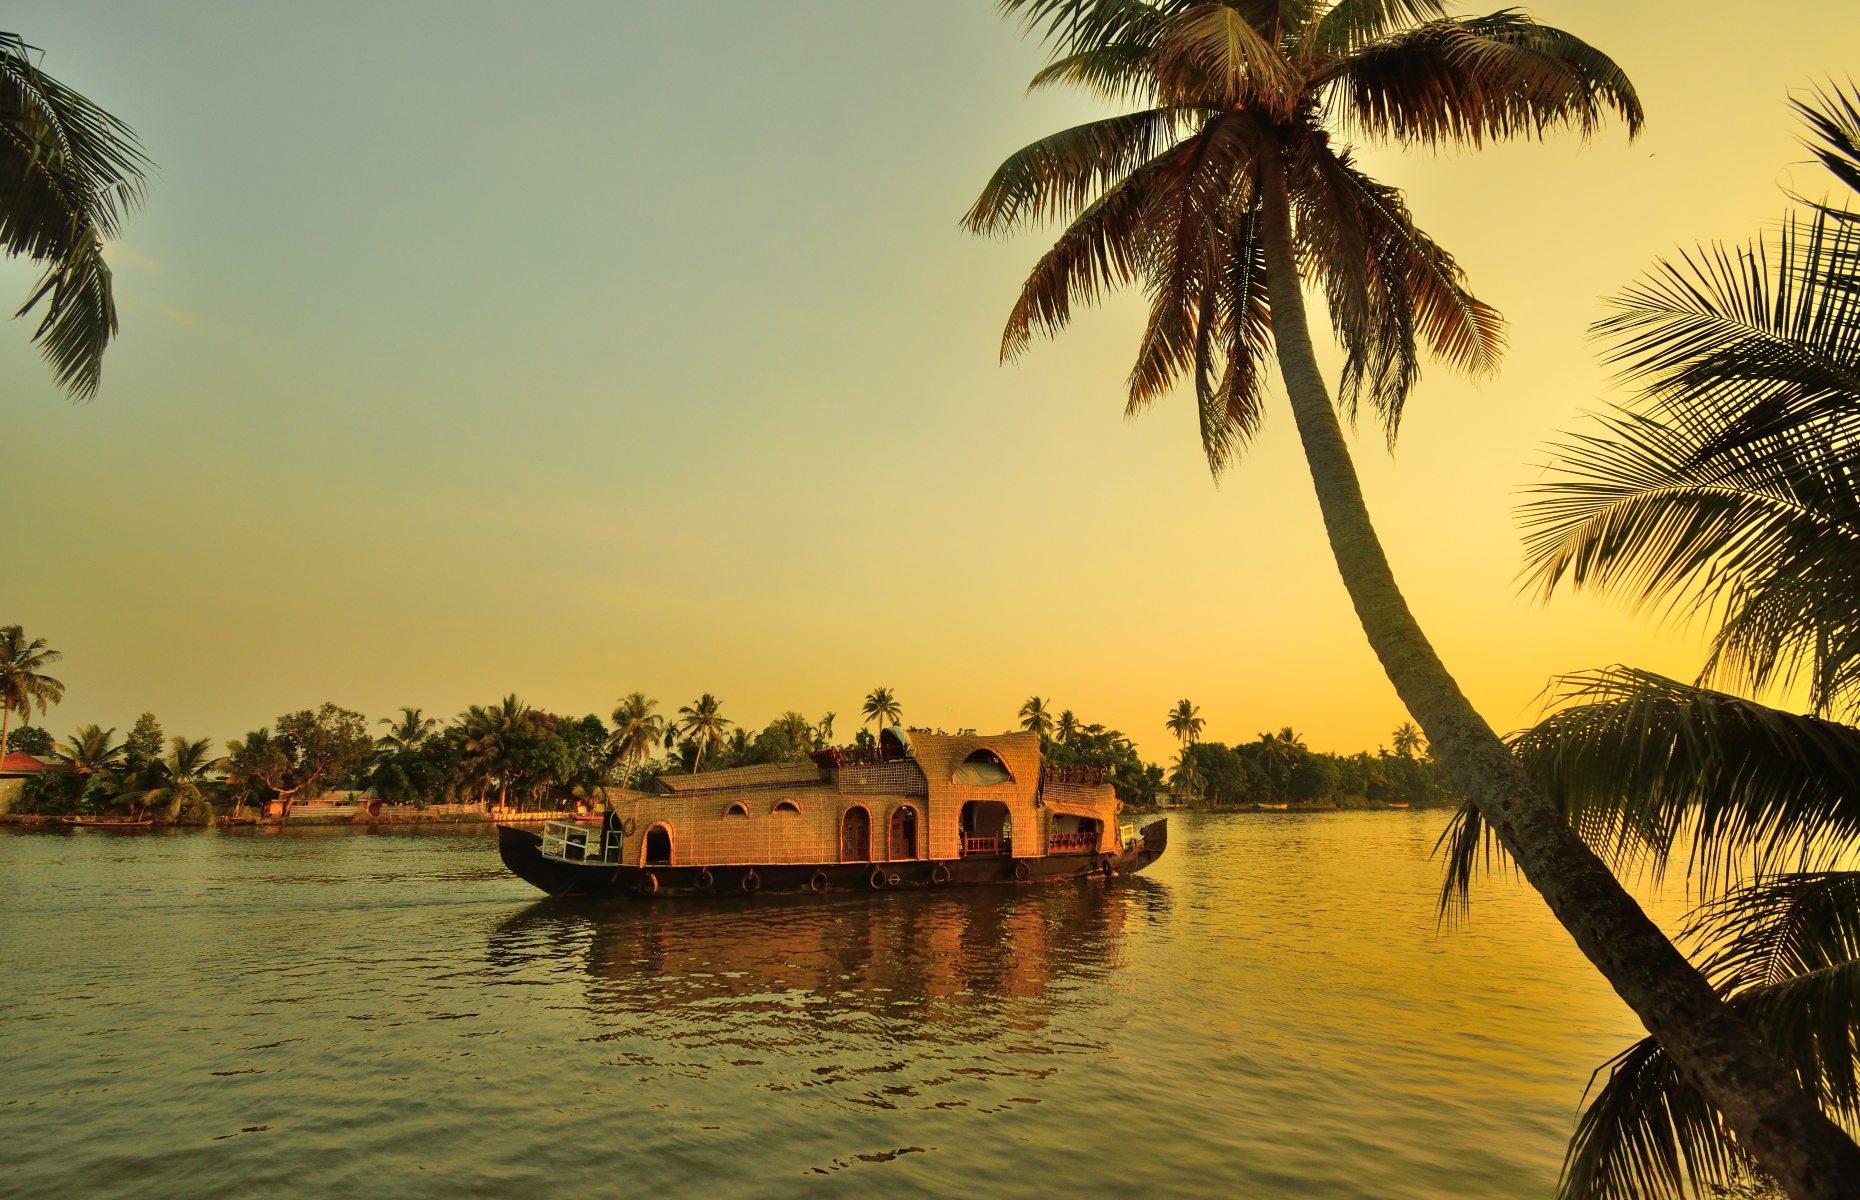 Formerly known as Alleppey, Alappuzha is a city on the Laccadive Sea studded with Kerala’s famous lagoons, rivers and canals. Fringed by palm trees and farmland, the city’s backwaters are decorated with houseboats and punted canoes. With its tangle of scenic waterways, Alappuzha is a popular destination for houseboat cruises and is also the location for the famous Nehru Trophy Boat Race, one of the biggest events of the region.